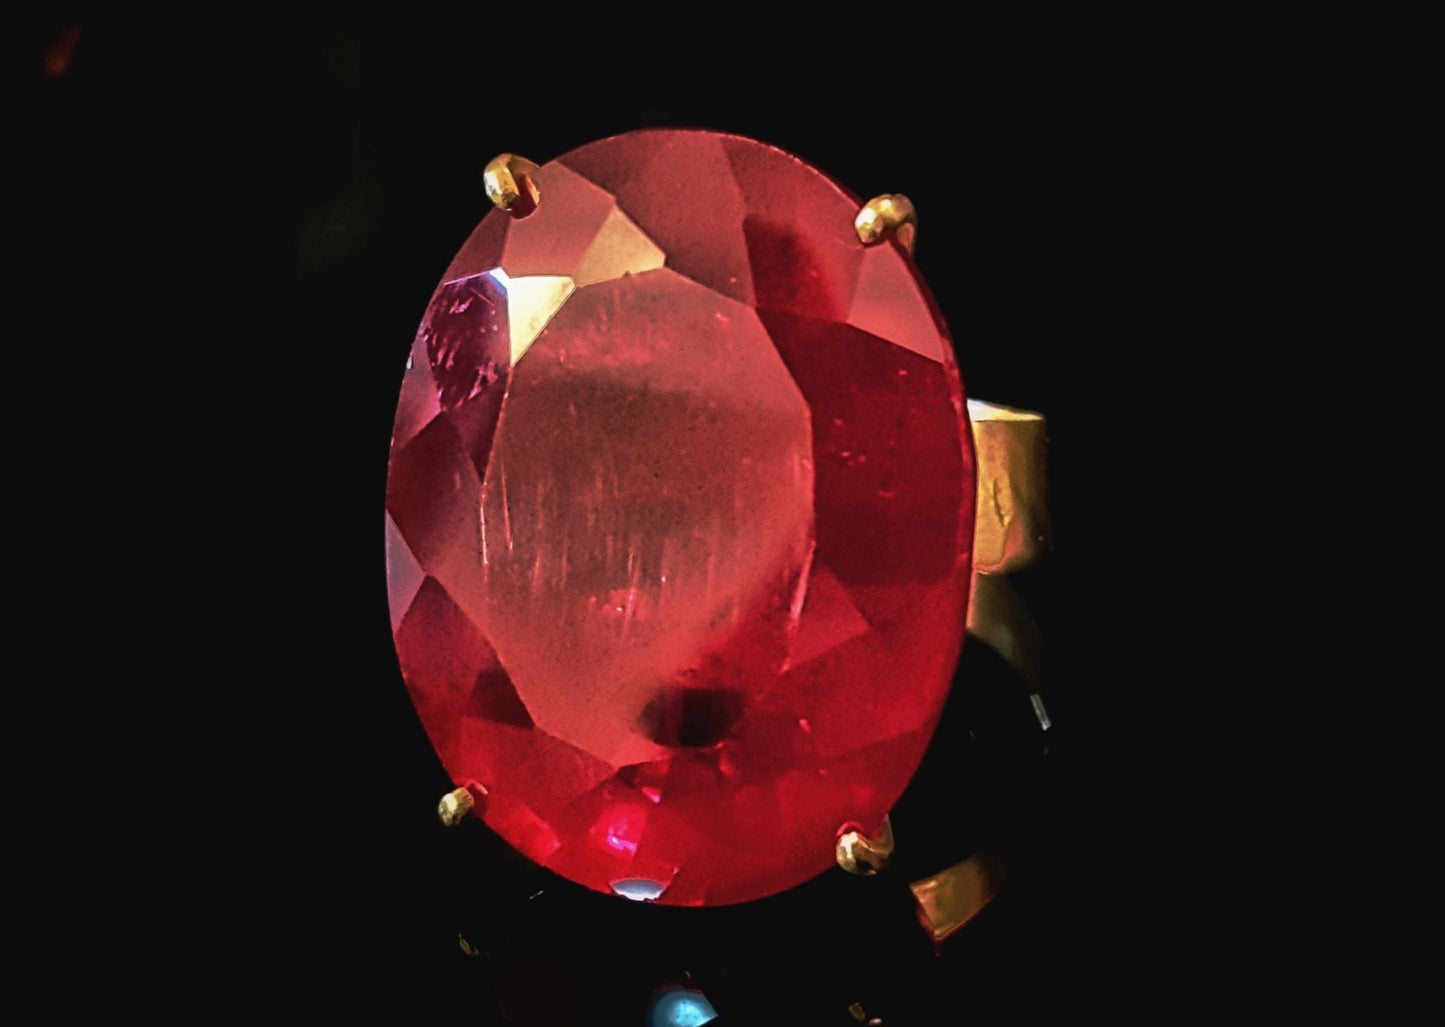 18k Yellow Gold Rubellite Ring, Large Oval Rubellite and wide band ring in a black background